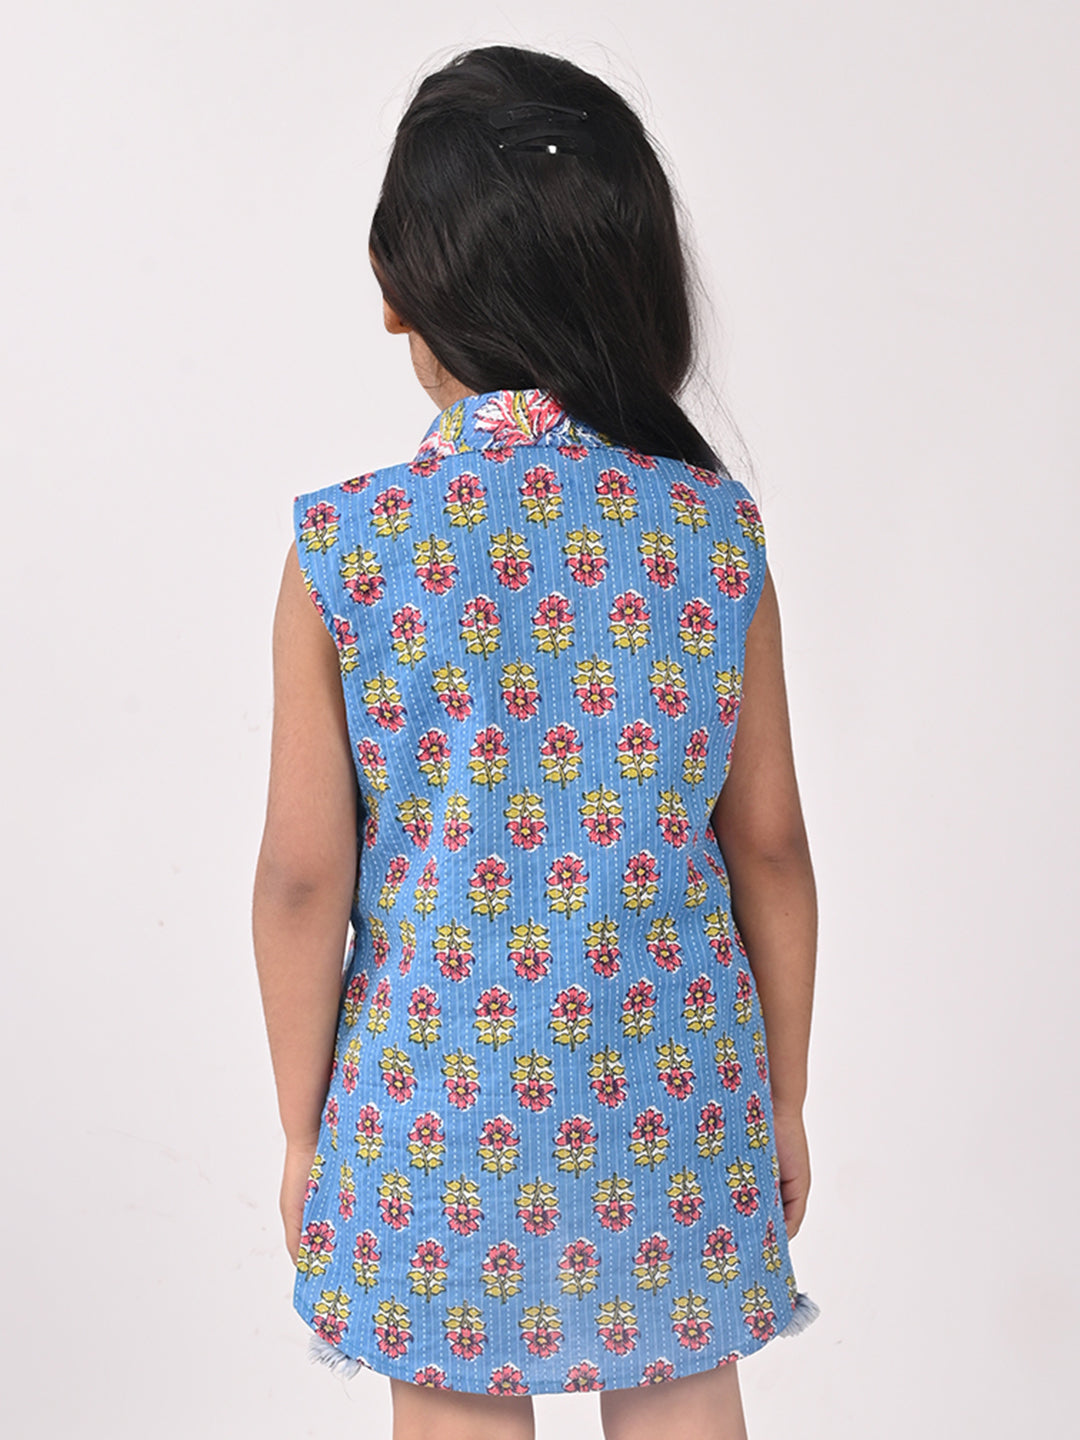 Blue Cotton Floral Printed Sleevless shirt style Top